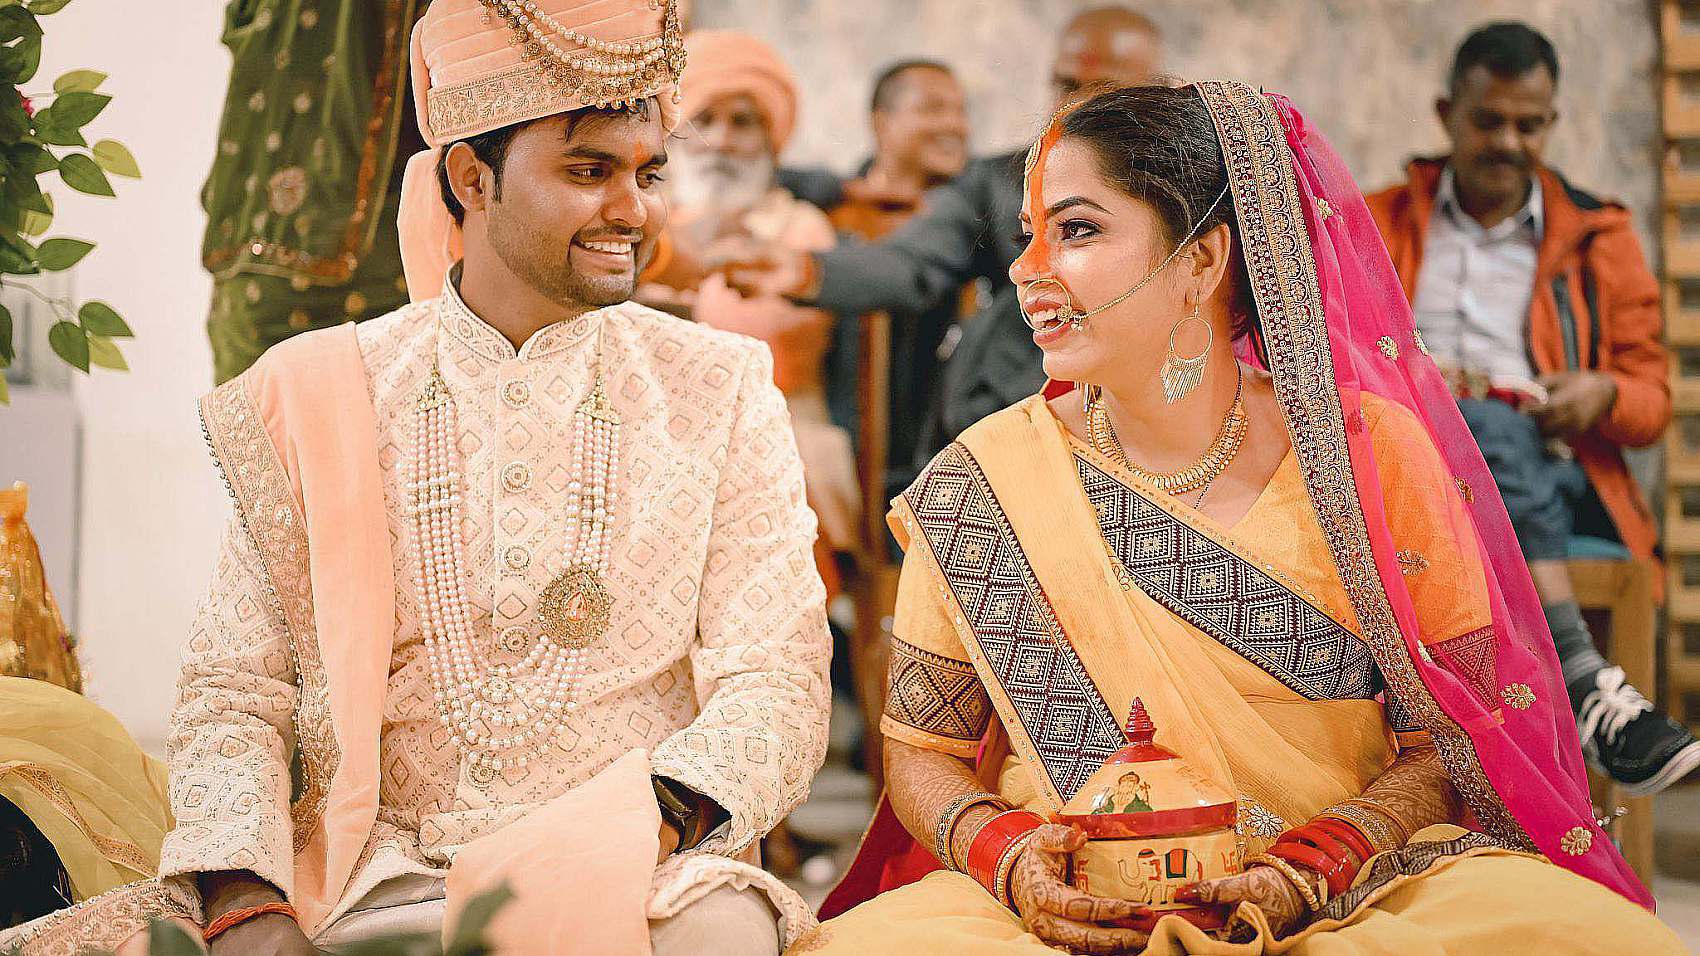 Are there any good wedding photographers in Gorakhpur?